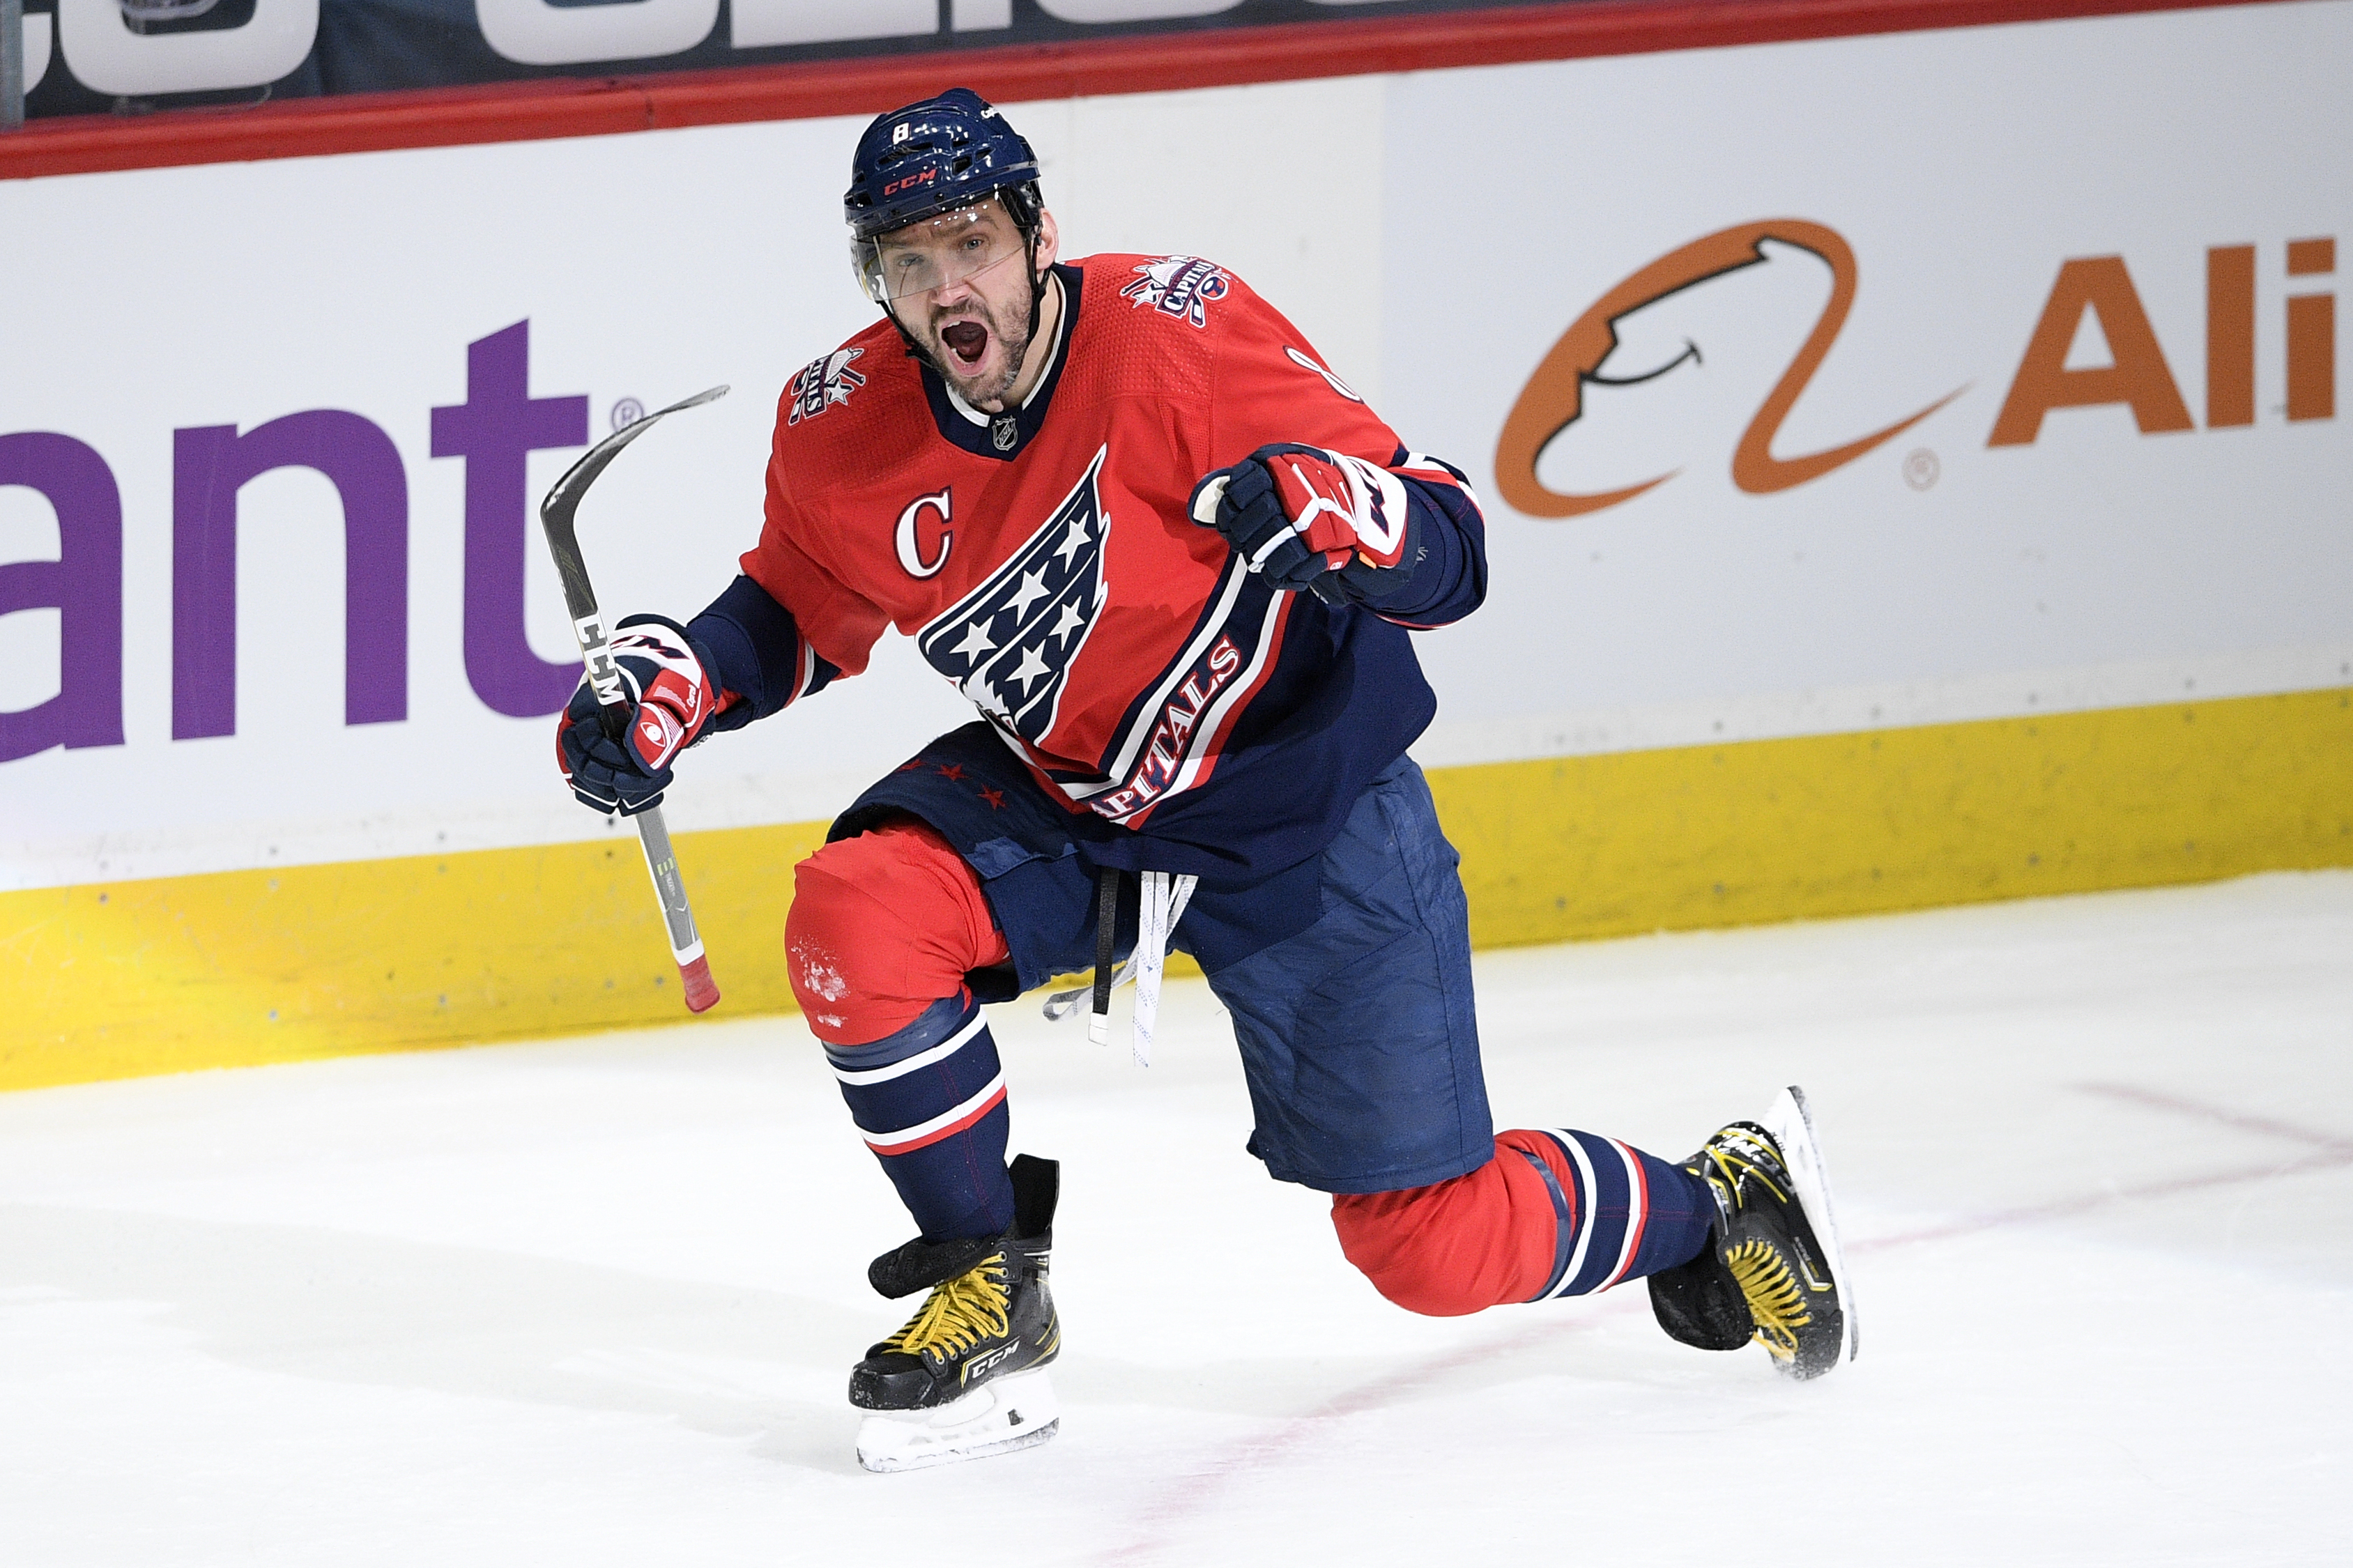 Ovechkin in pursuit of Gretzky's goals record, Sports